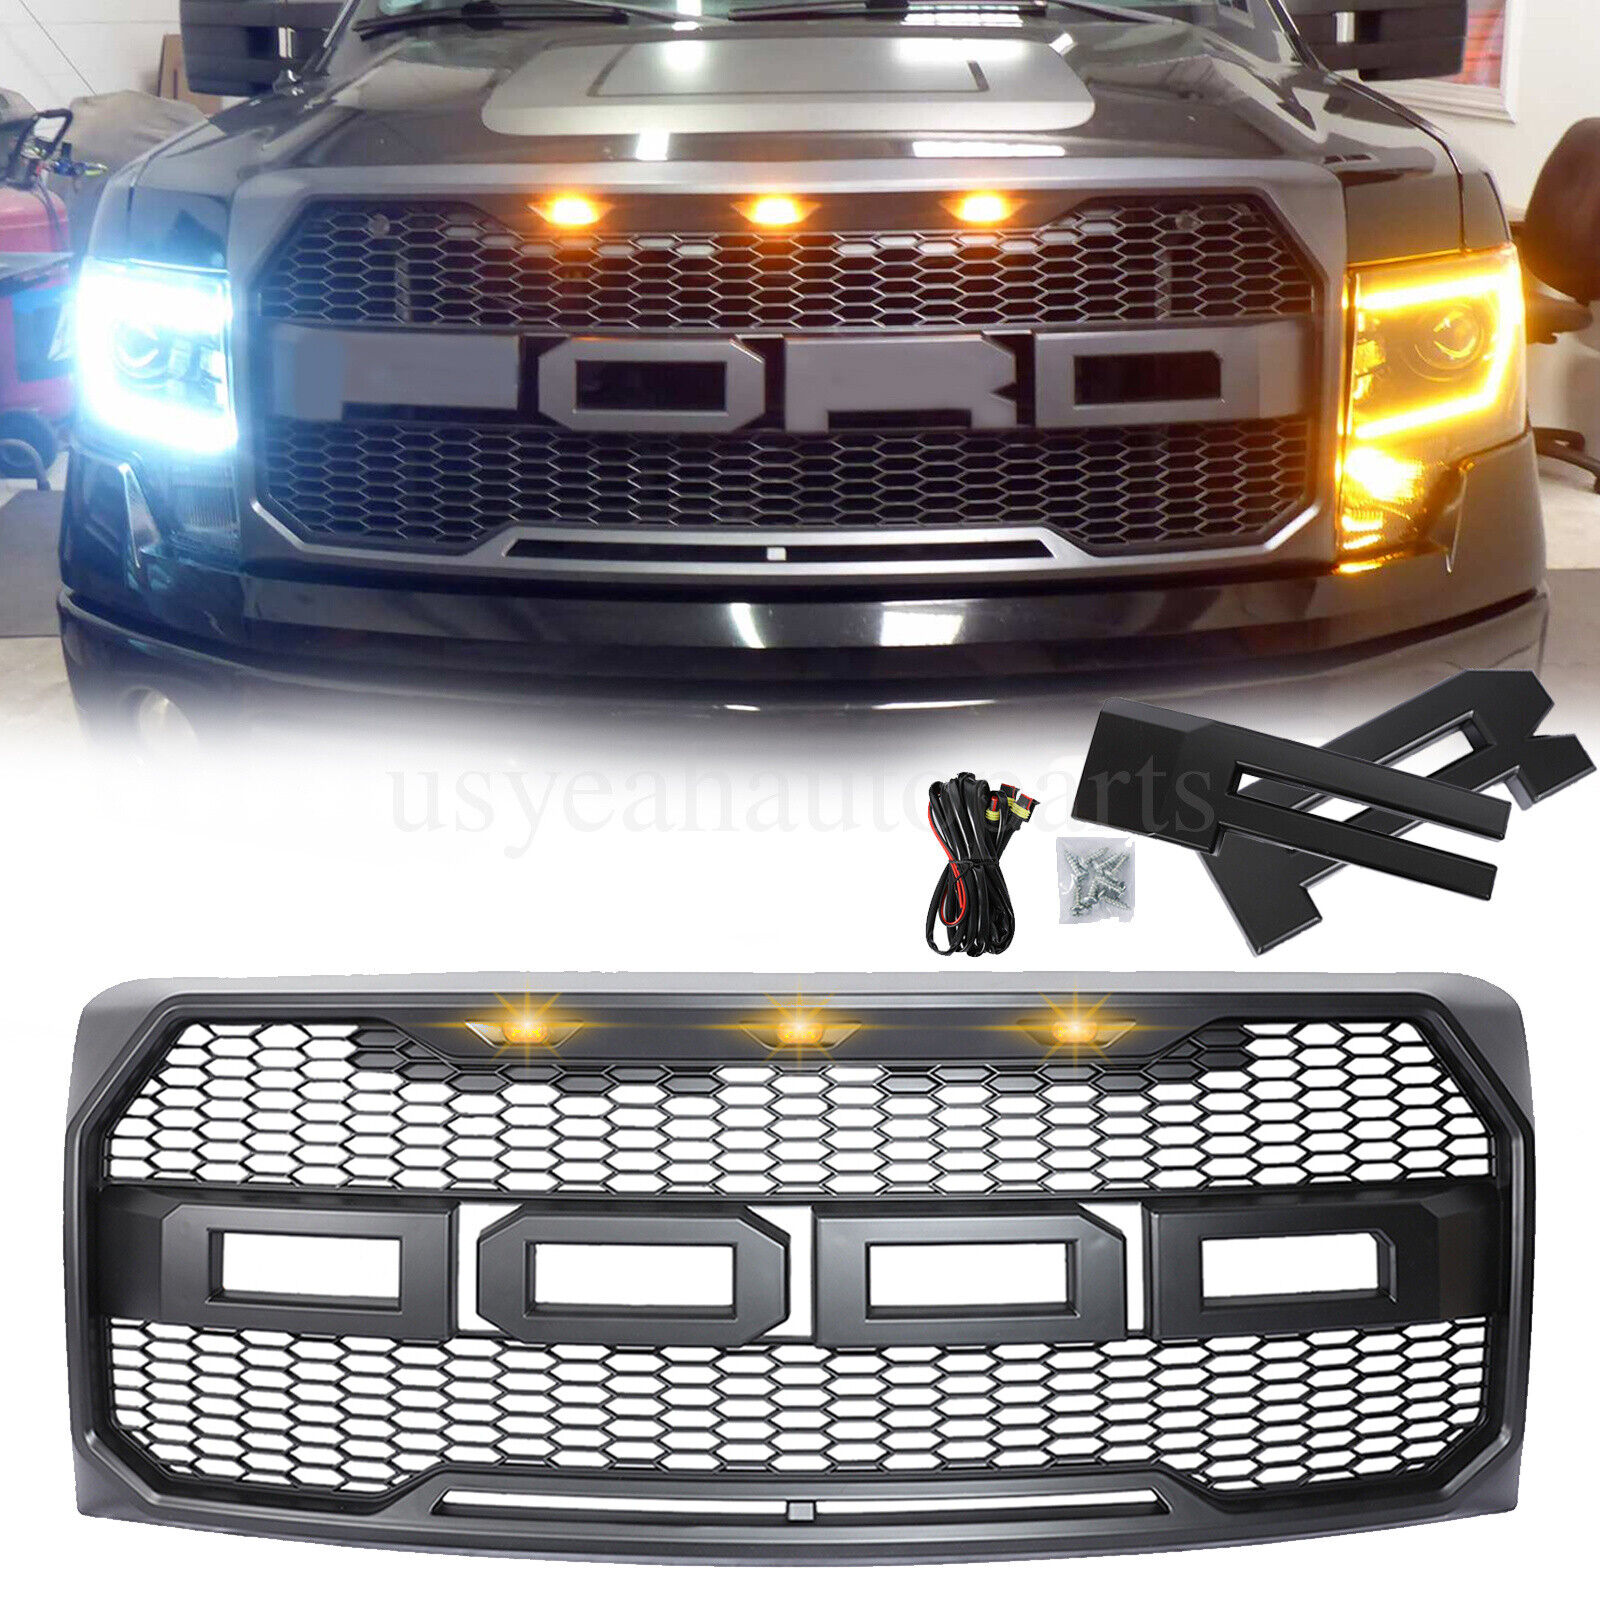 For 2009-2014 Ford F150 F-150 Front Bumper Upper Grille Hood Grill Raptor Style